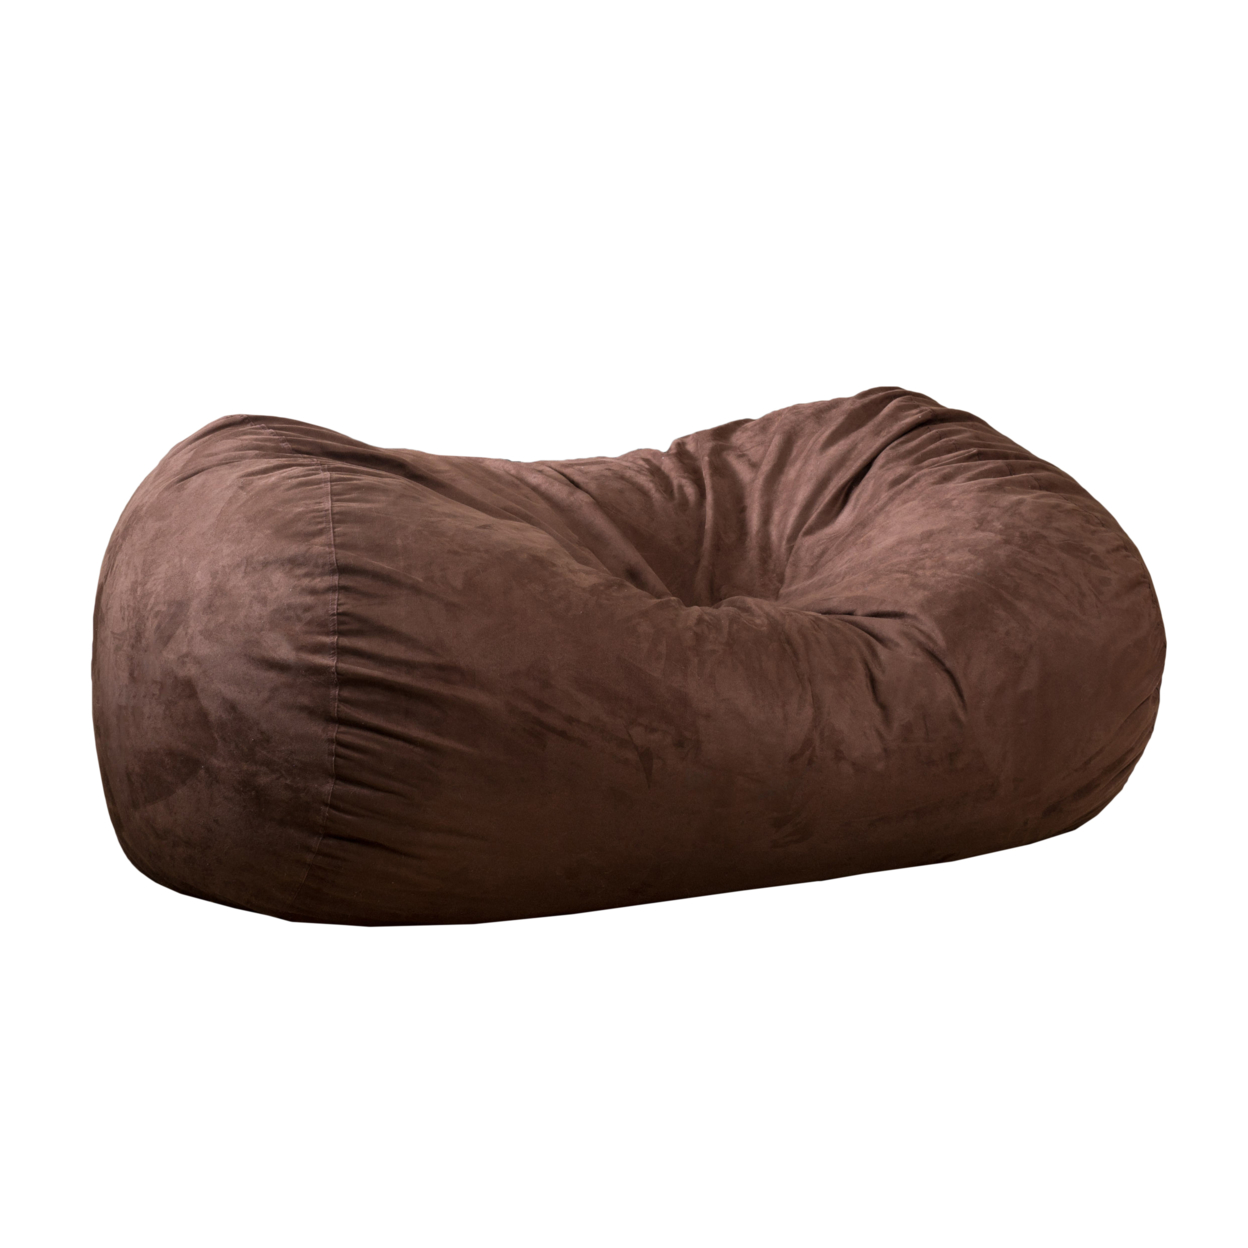 Flora Traditional 6.5 Foot Suede Bean Bag (Cover Only), Charcoal - French Roast